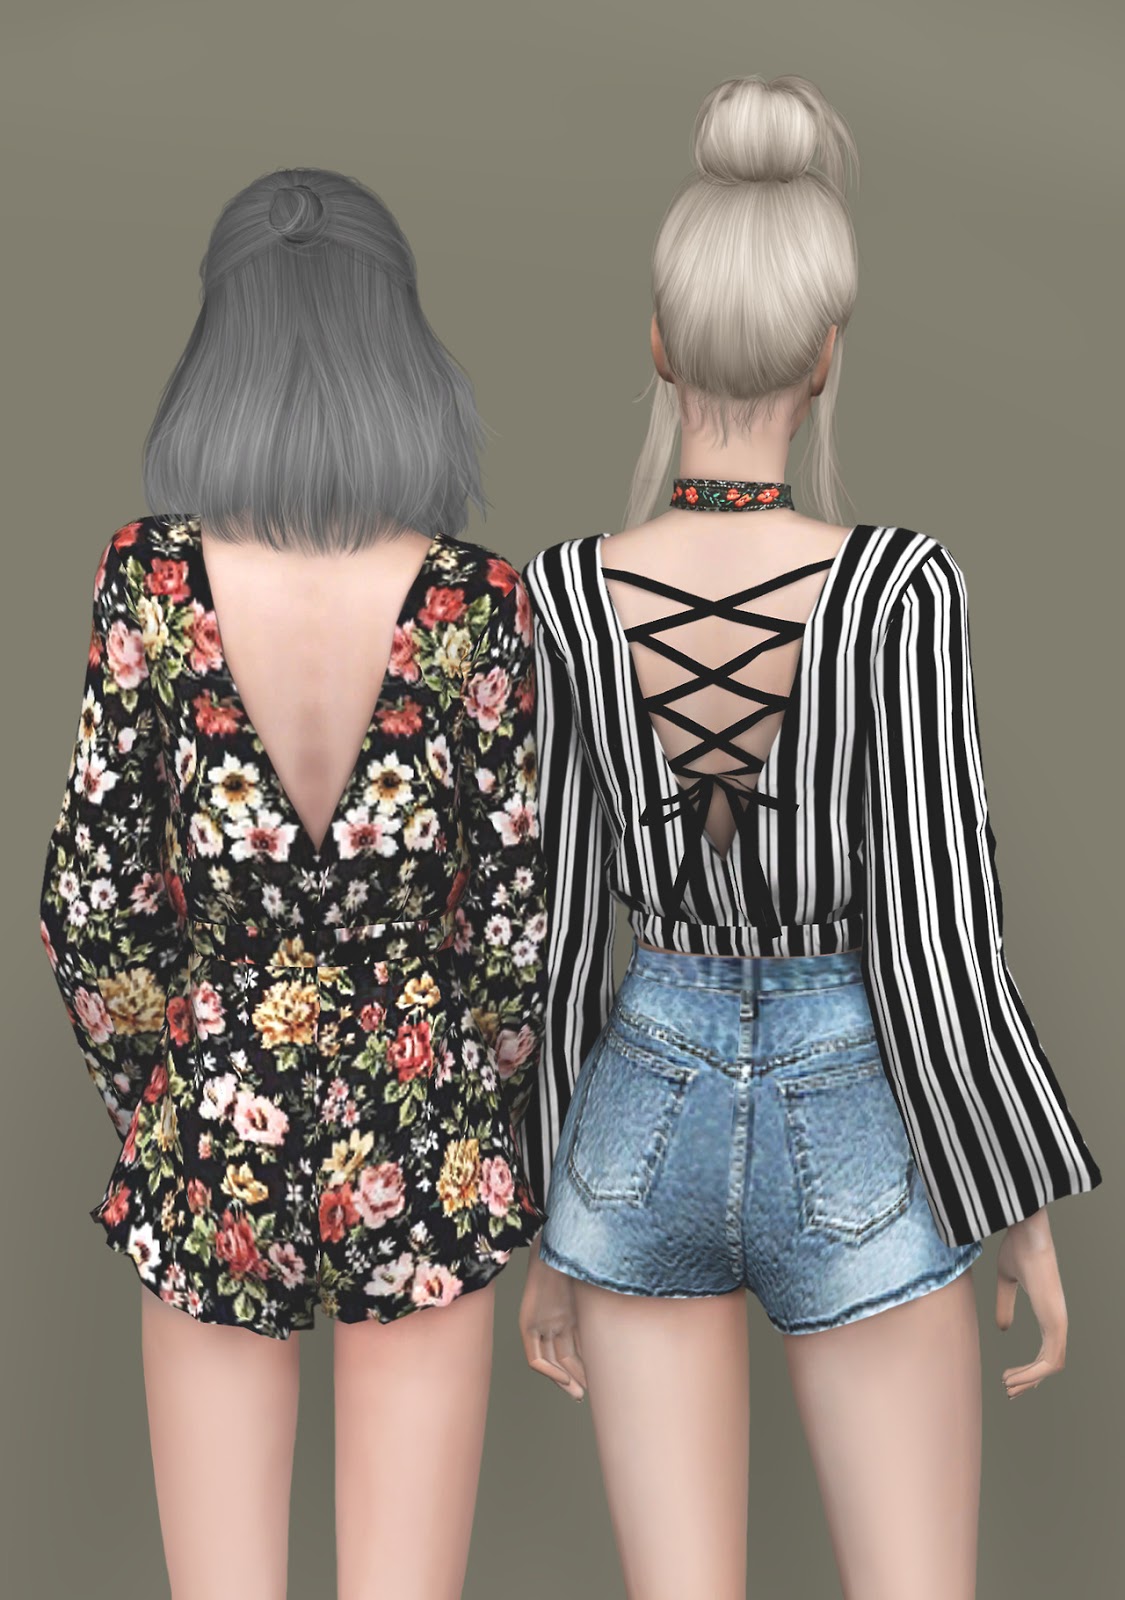 Sims 4 Clothing